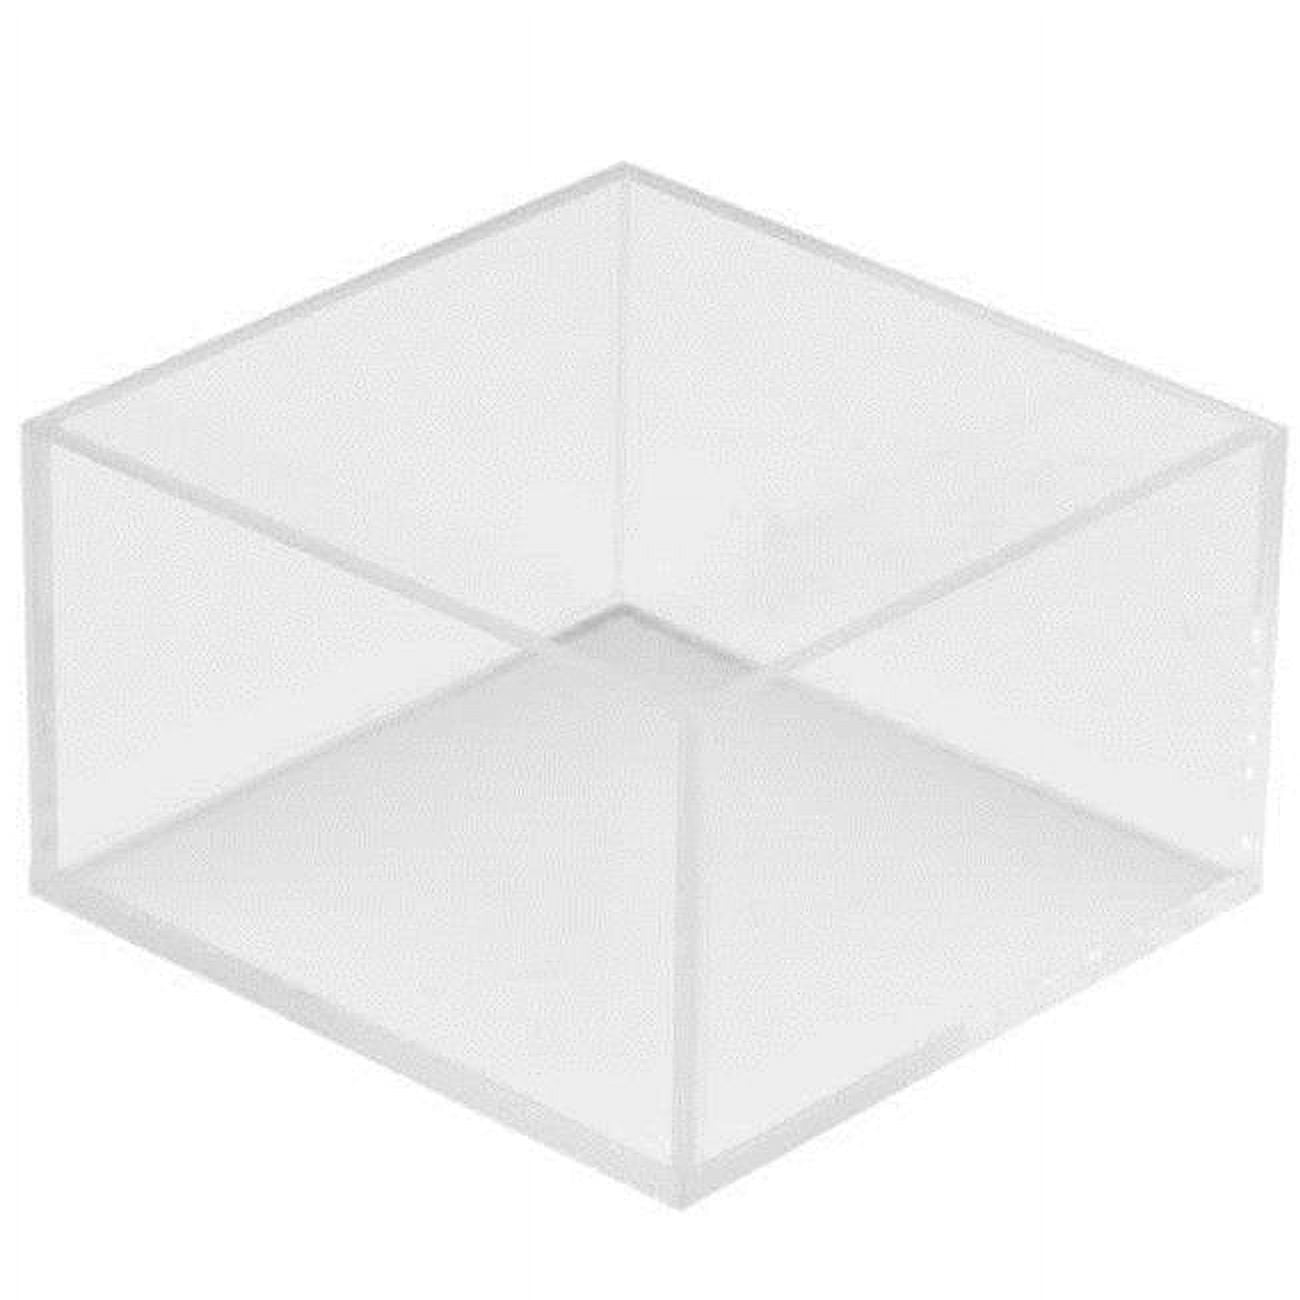 Picture of Cal Mil 1395-12 Cater Choice Clear Acrylic Square Accessory Bowl - 5 x 5 x 3 in.